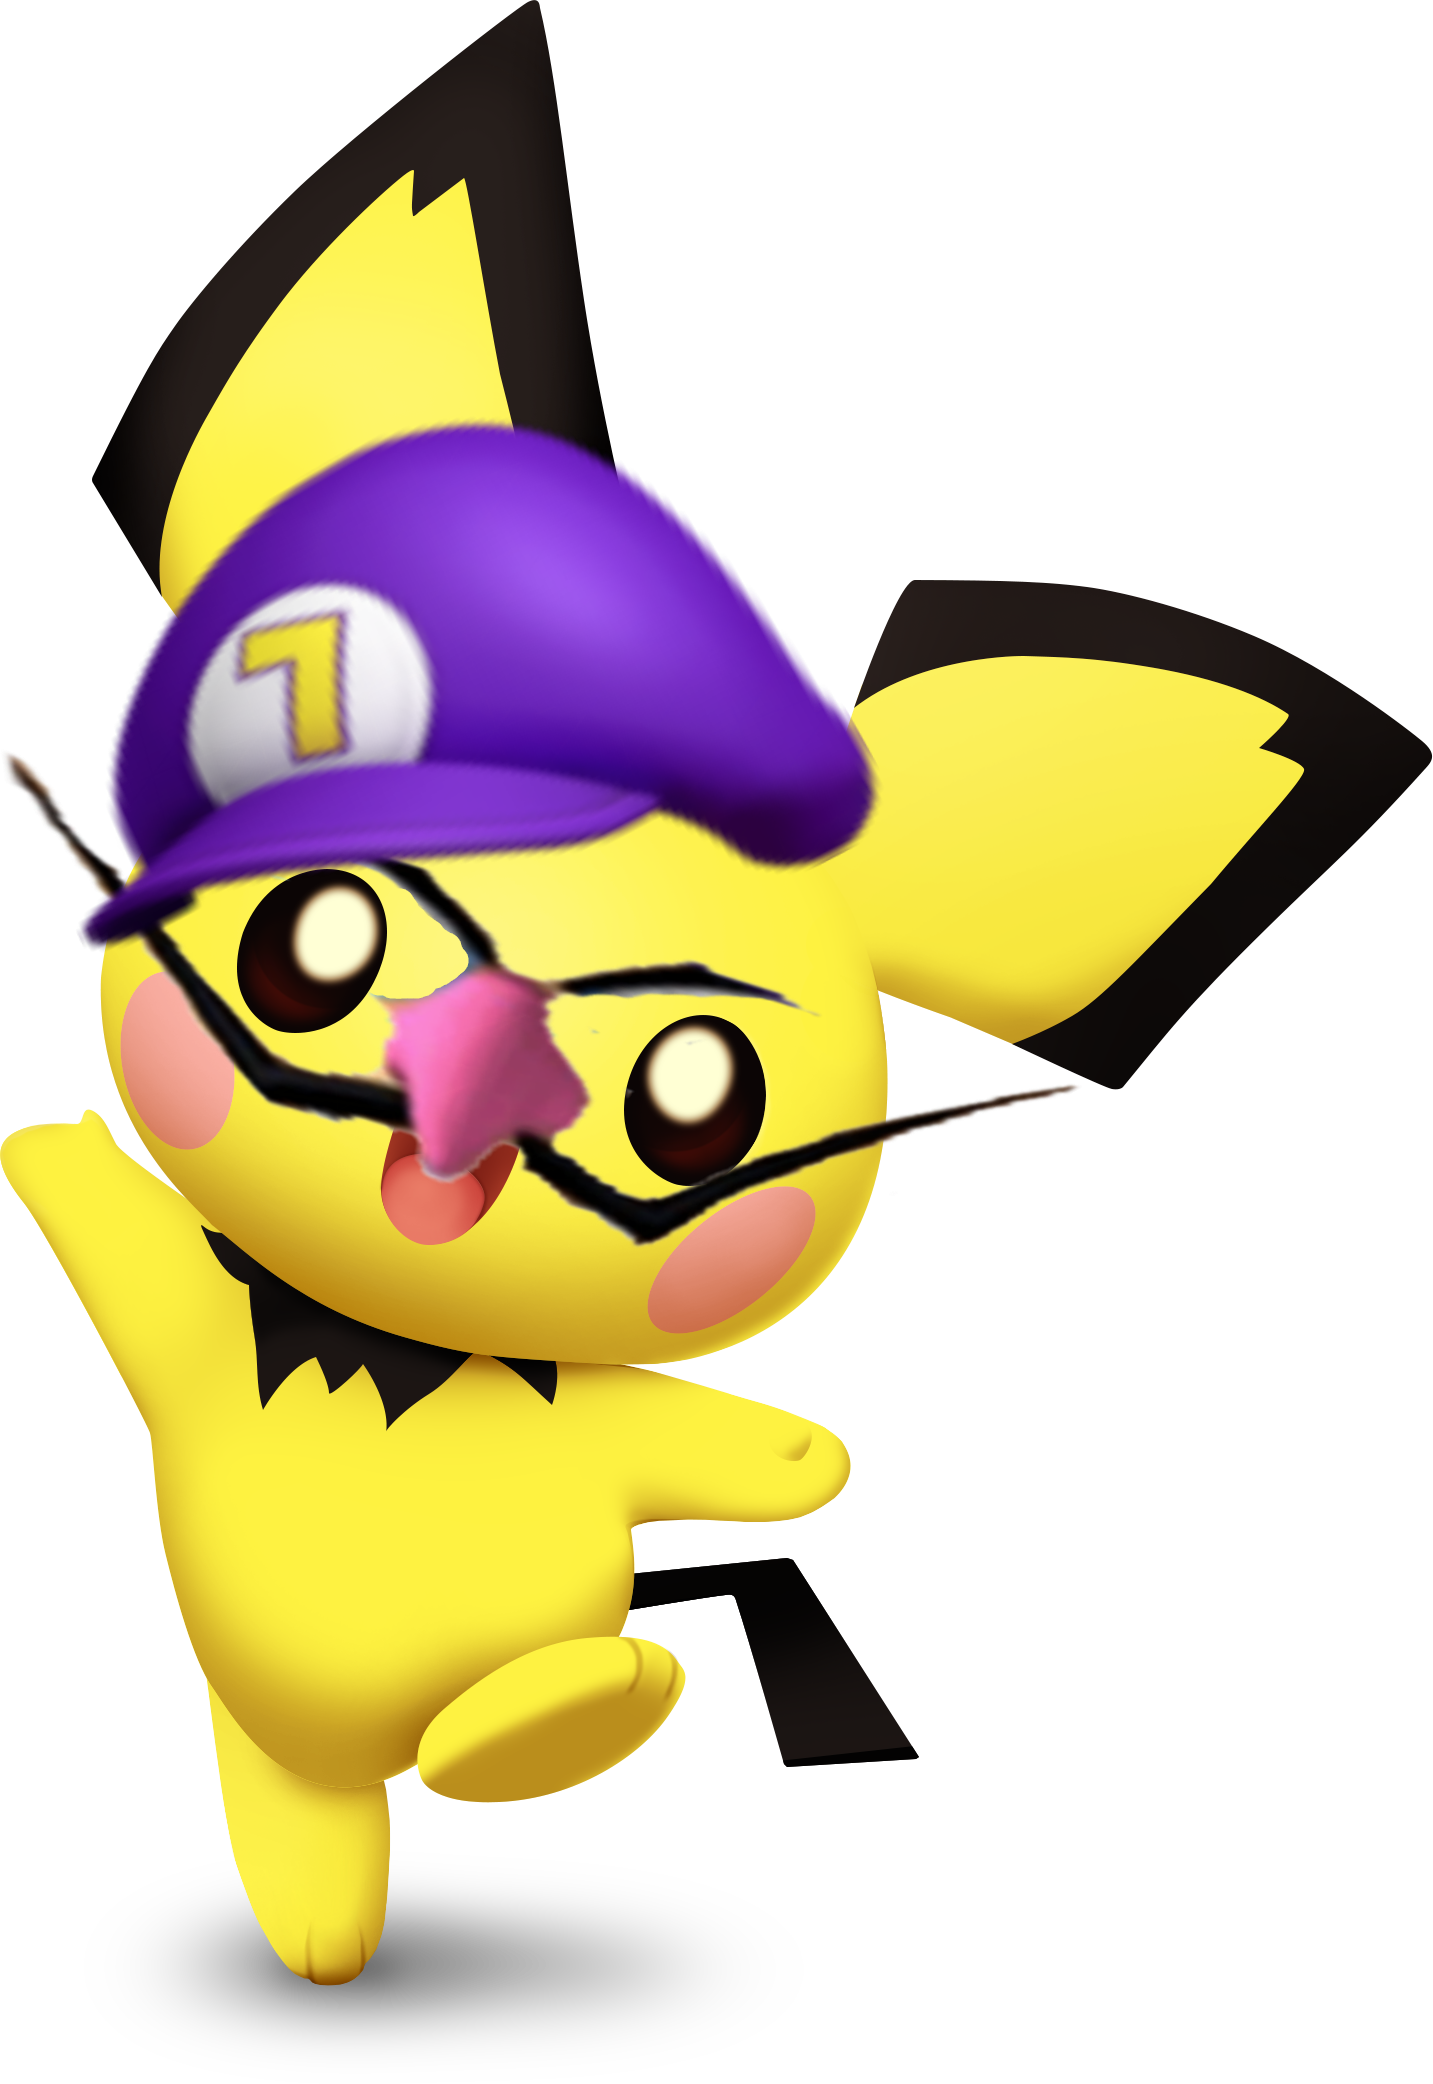 Pichu Attempts To Make Us Feel Better By Dressing Up - Pichu Attempts To Make Us Feel Better By Dressing Up (1433x2084)